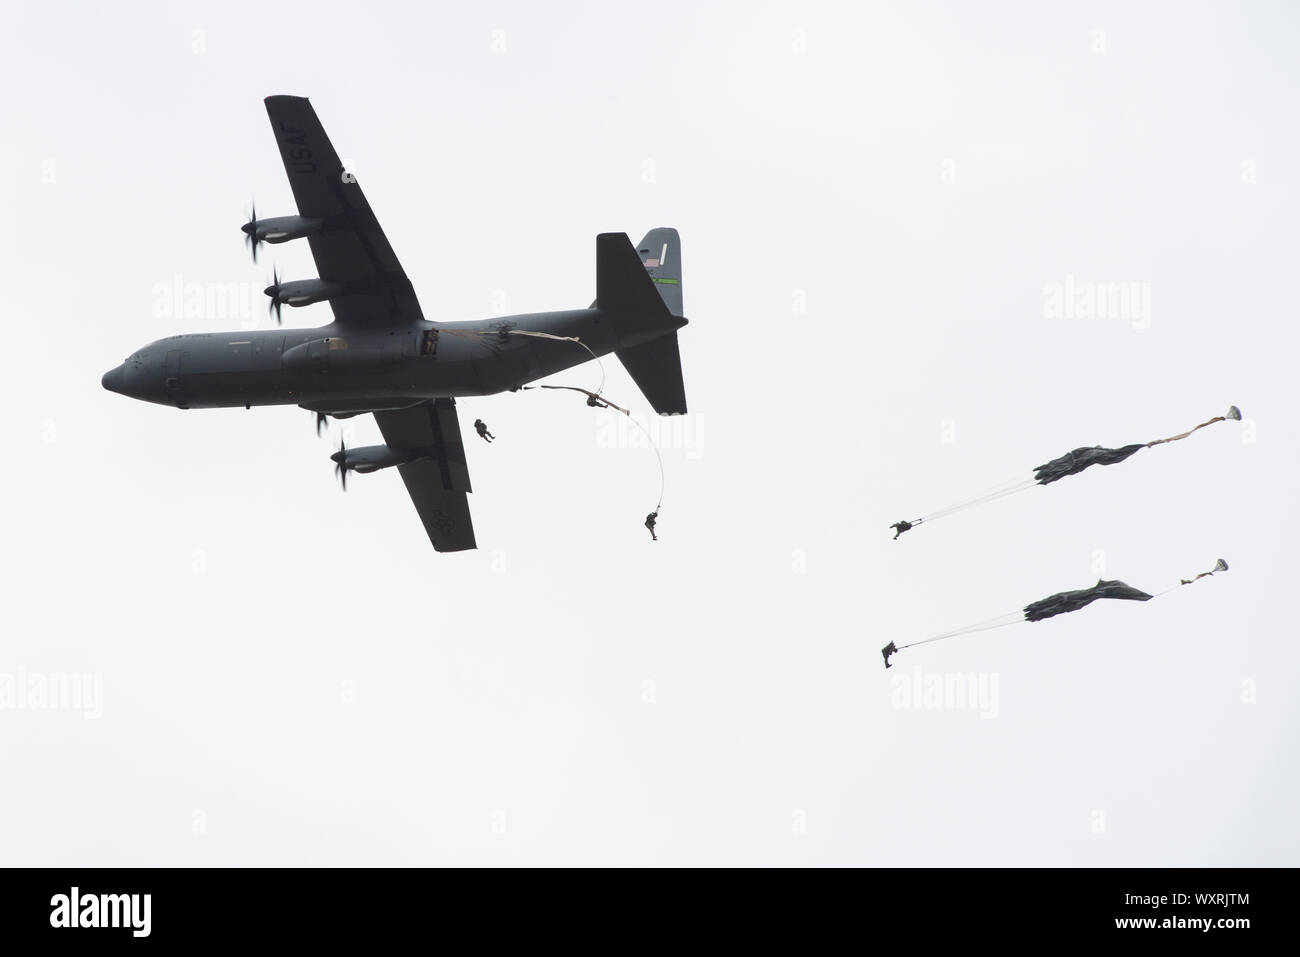 Army paratroopers with the 4th Infantry Brigade Combat Team (Airborne), 25th Infantry Division, U.S. Army Alaska, jump from an Air Force C-130J Super Hercules during airborne operations at Joint Base Elmendorf-Richardson, Alaska, Sept. 16, 2019. The Soldiers of 4/25 belong to the only American airborne brigade in the Pacific and are trained to execute airborne maneuvers in extreme cold weather and high altitude environments in support of combat, partnership and disaster relief operations. (U.S. Air Force photo by Alejandro Peña) Stock Photo